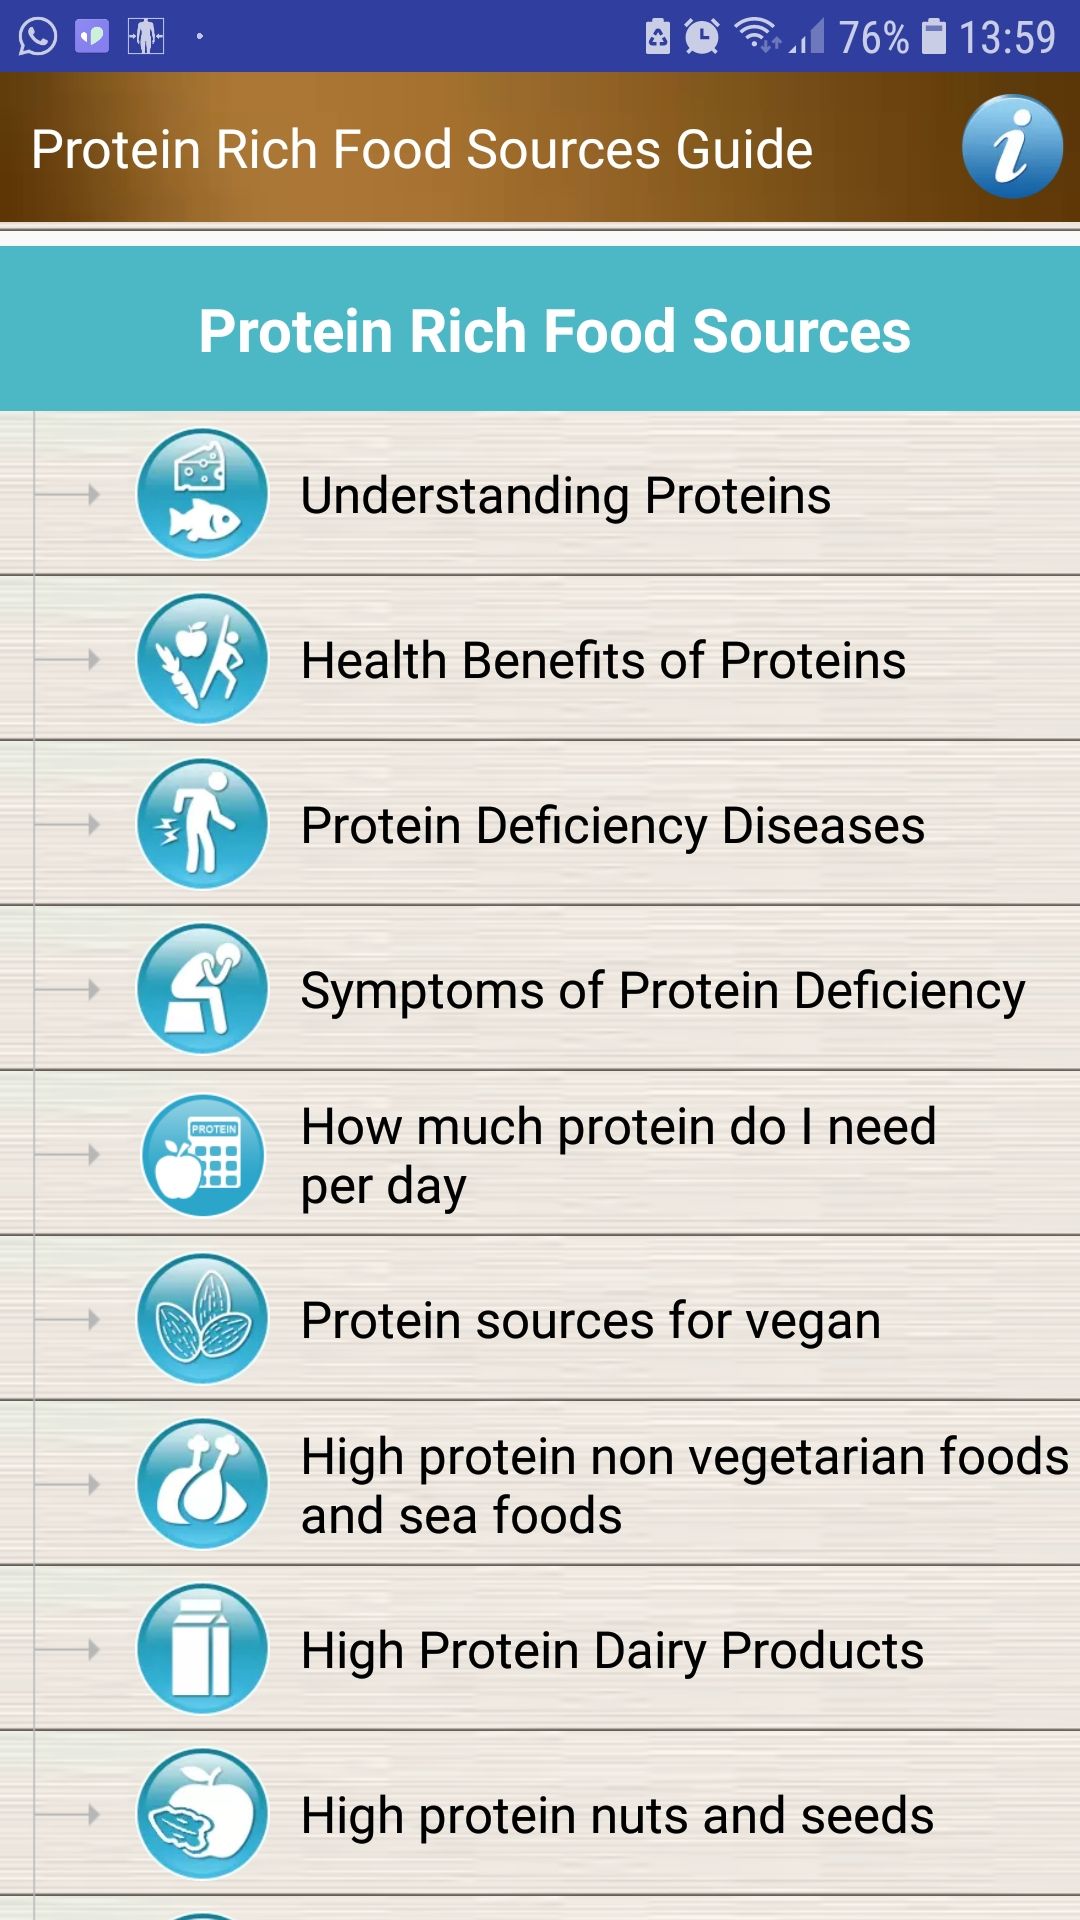 Protein Rich Food Sources Guide mobile app